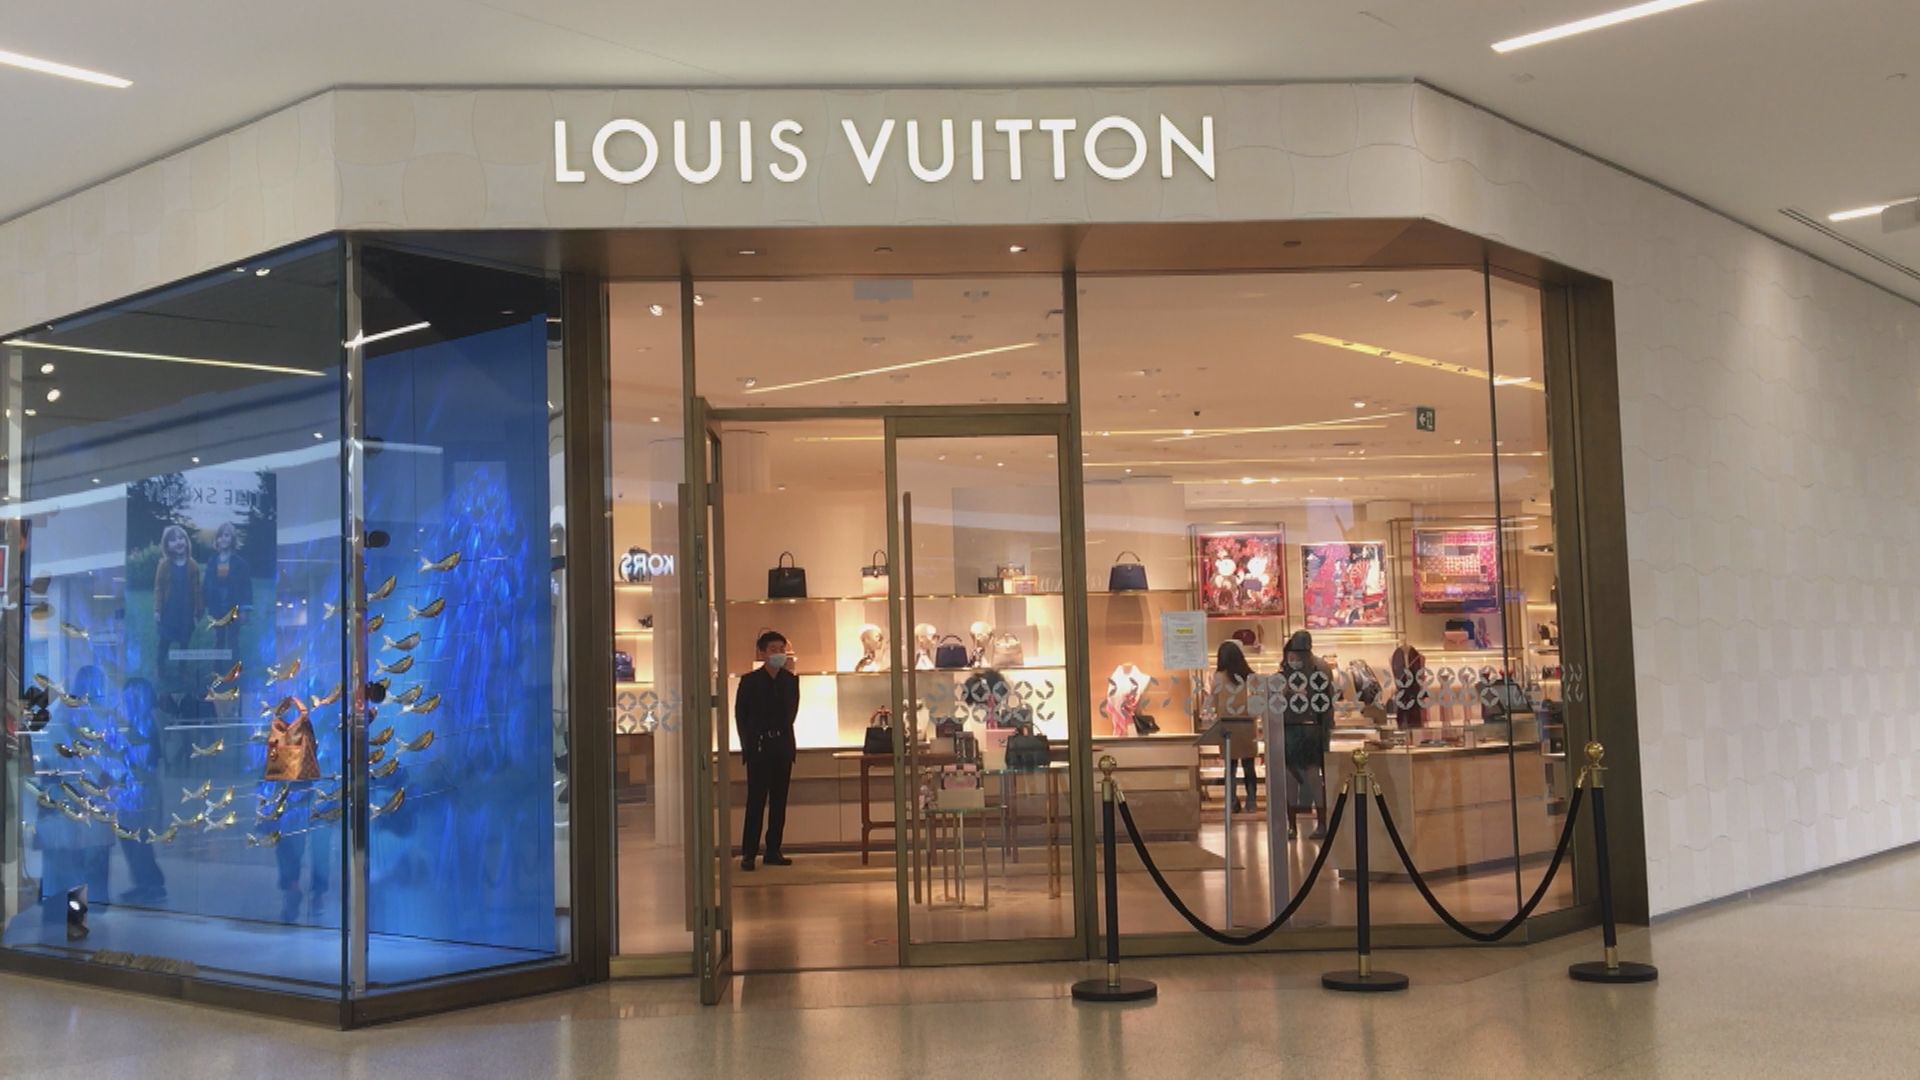 louis vuitton mall of america